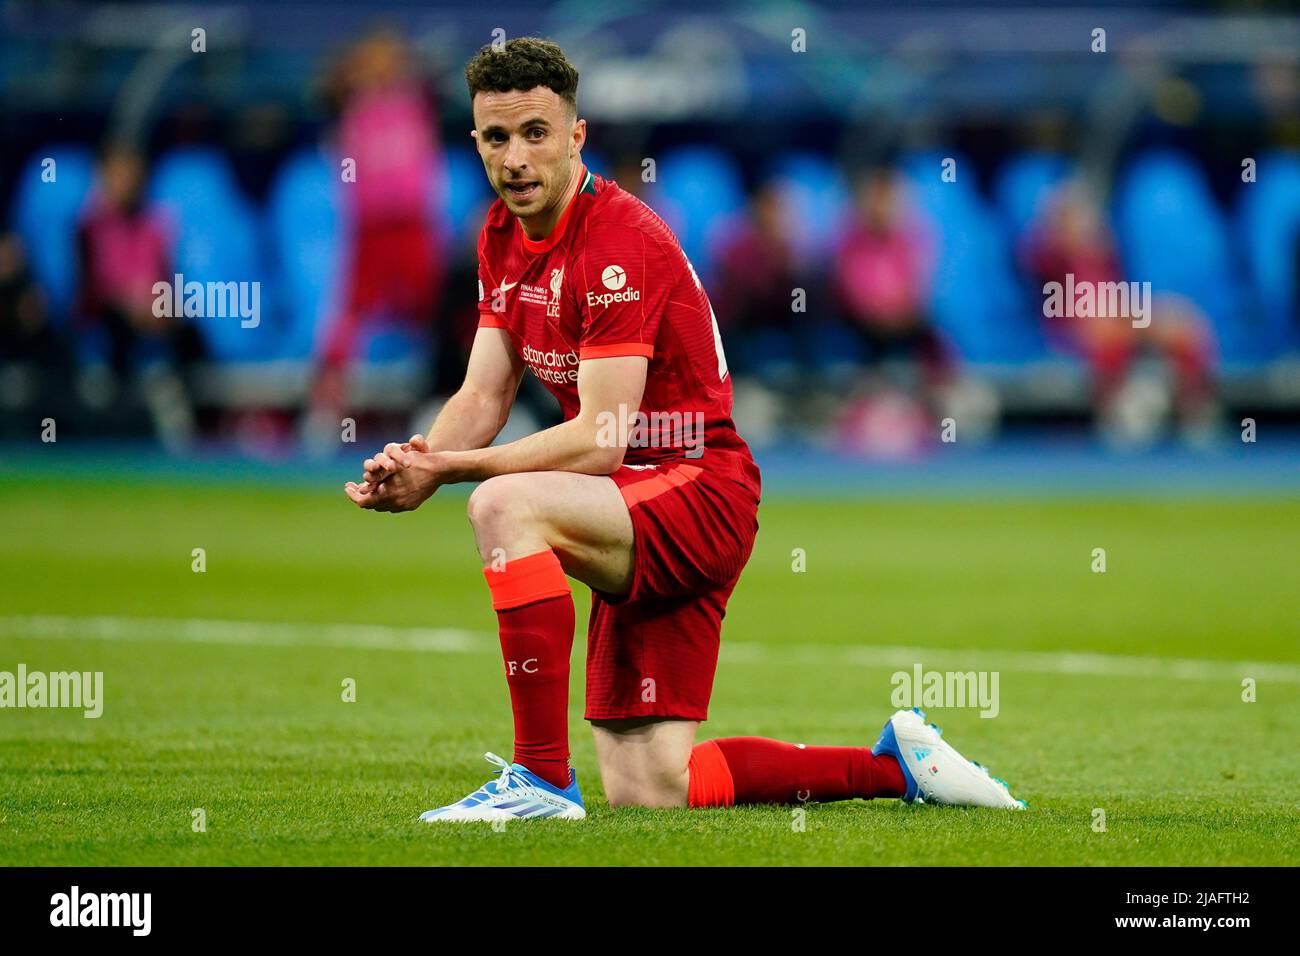 Diogo Jota of Liverpool FC during the UEFA Champions League Final match between Liverpool FC and Real Madrid played at Stade de France on May 28, 2022 in Paris, France. (Photo / Magma) Stock Photo